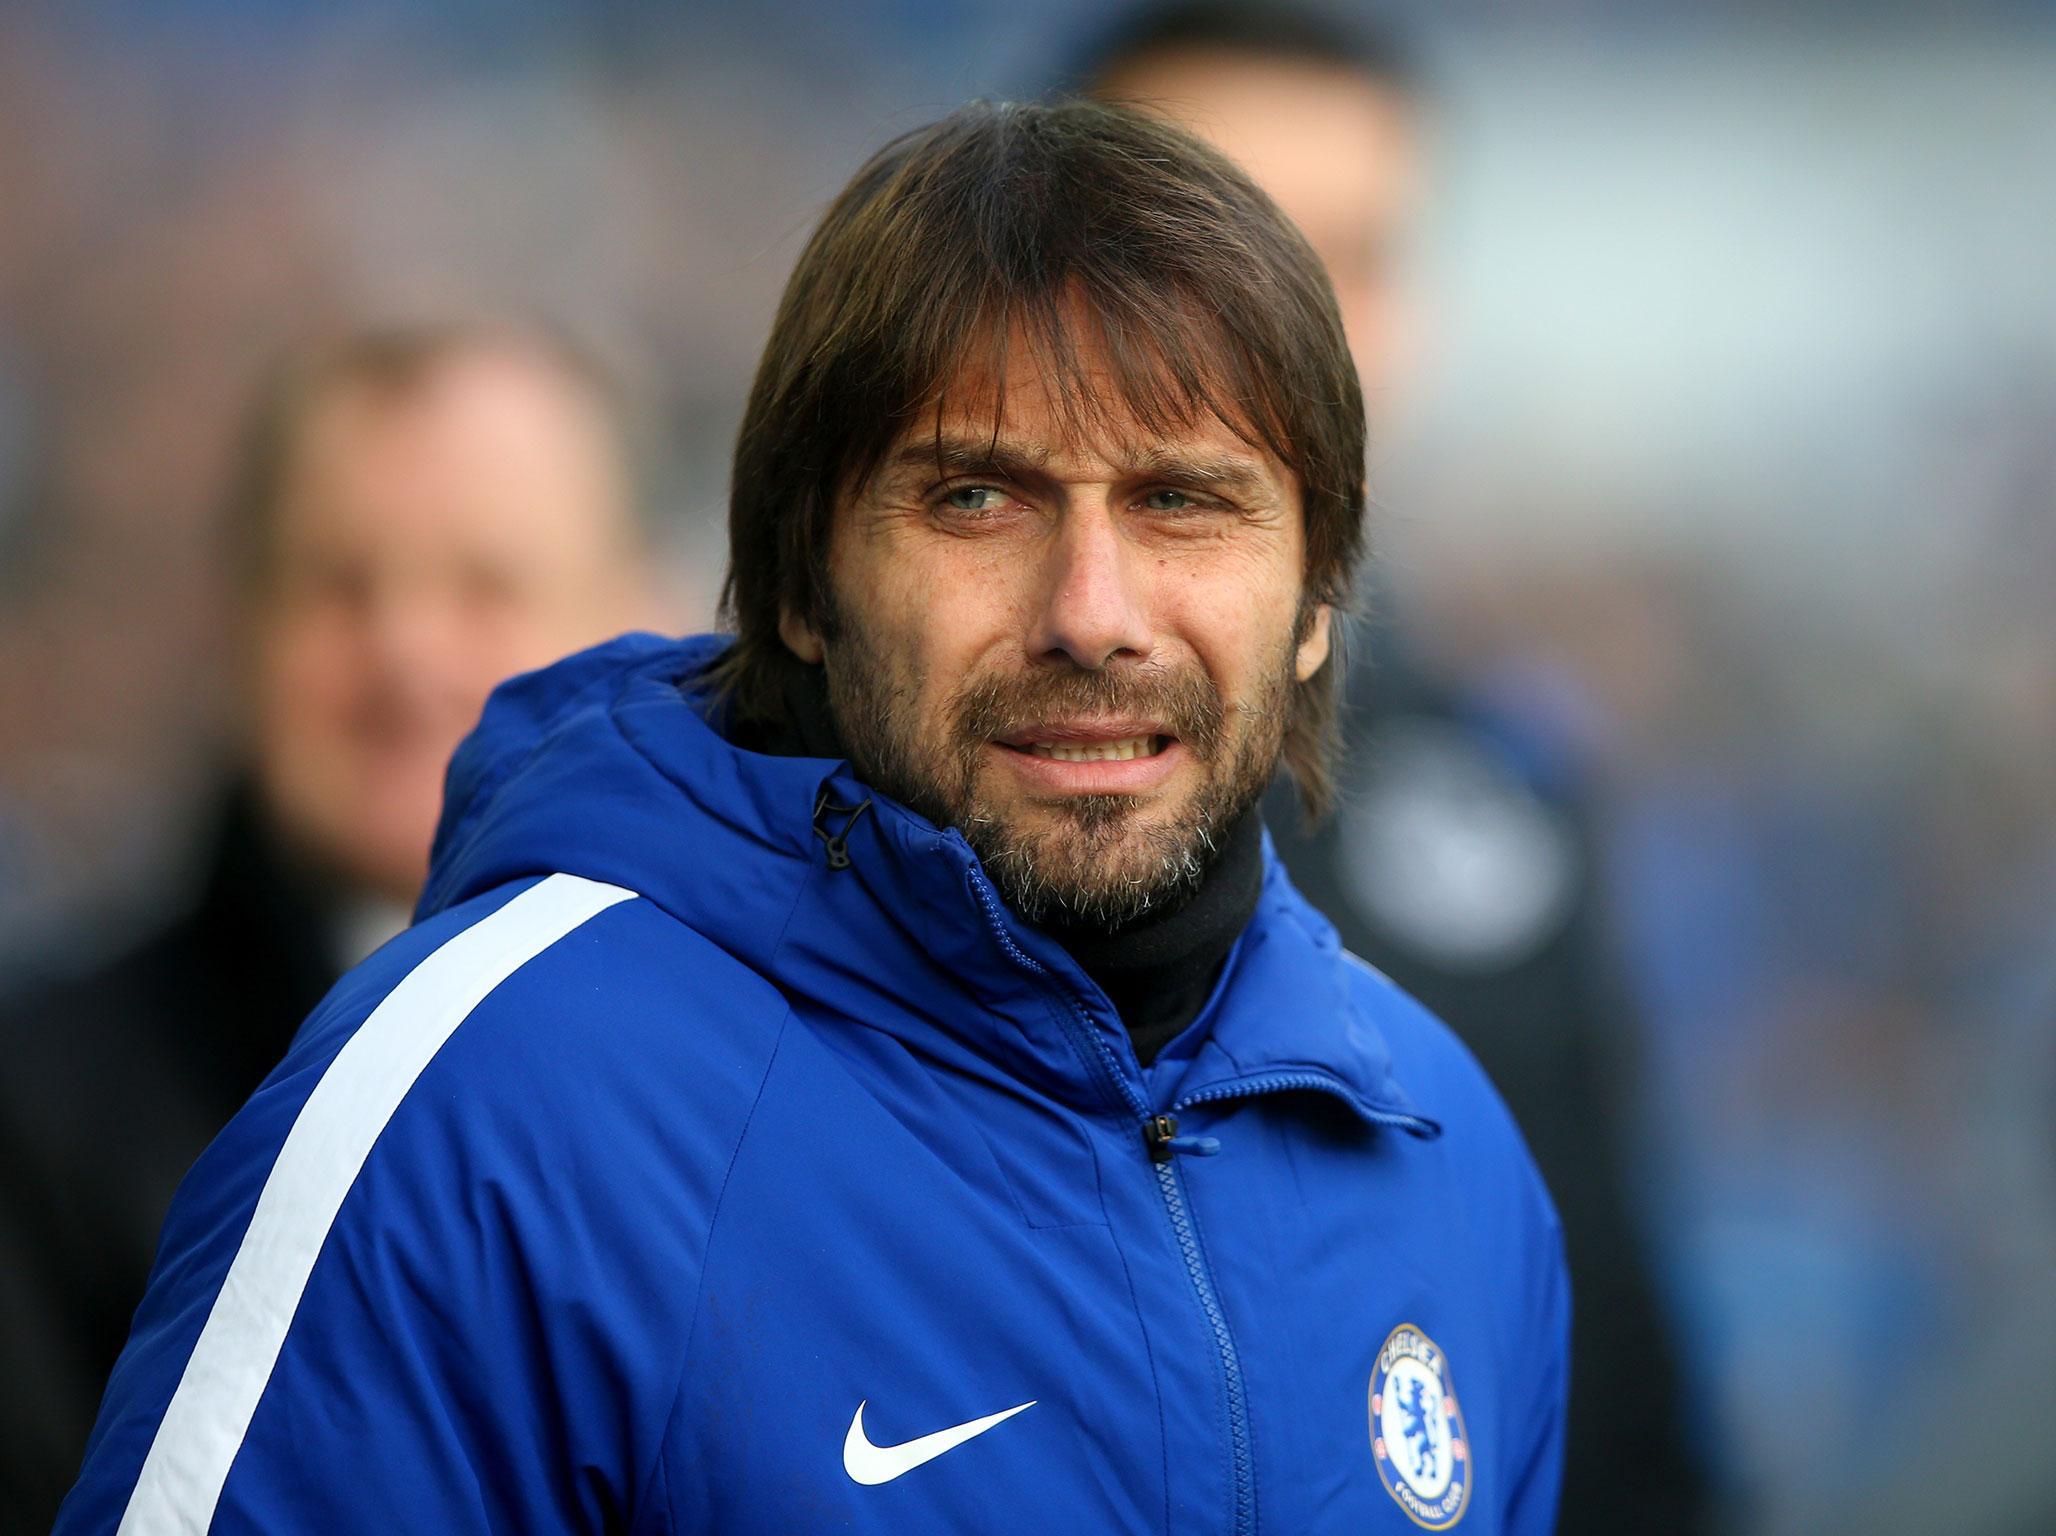 Antonio Conte is looking to add numbers to his squad